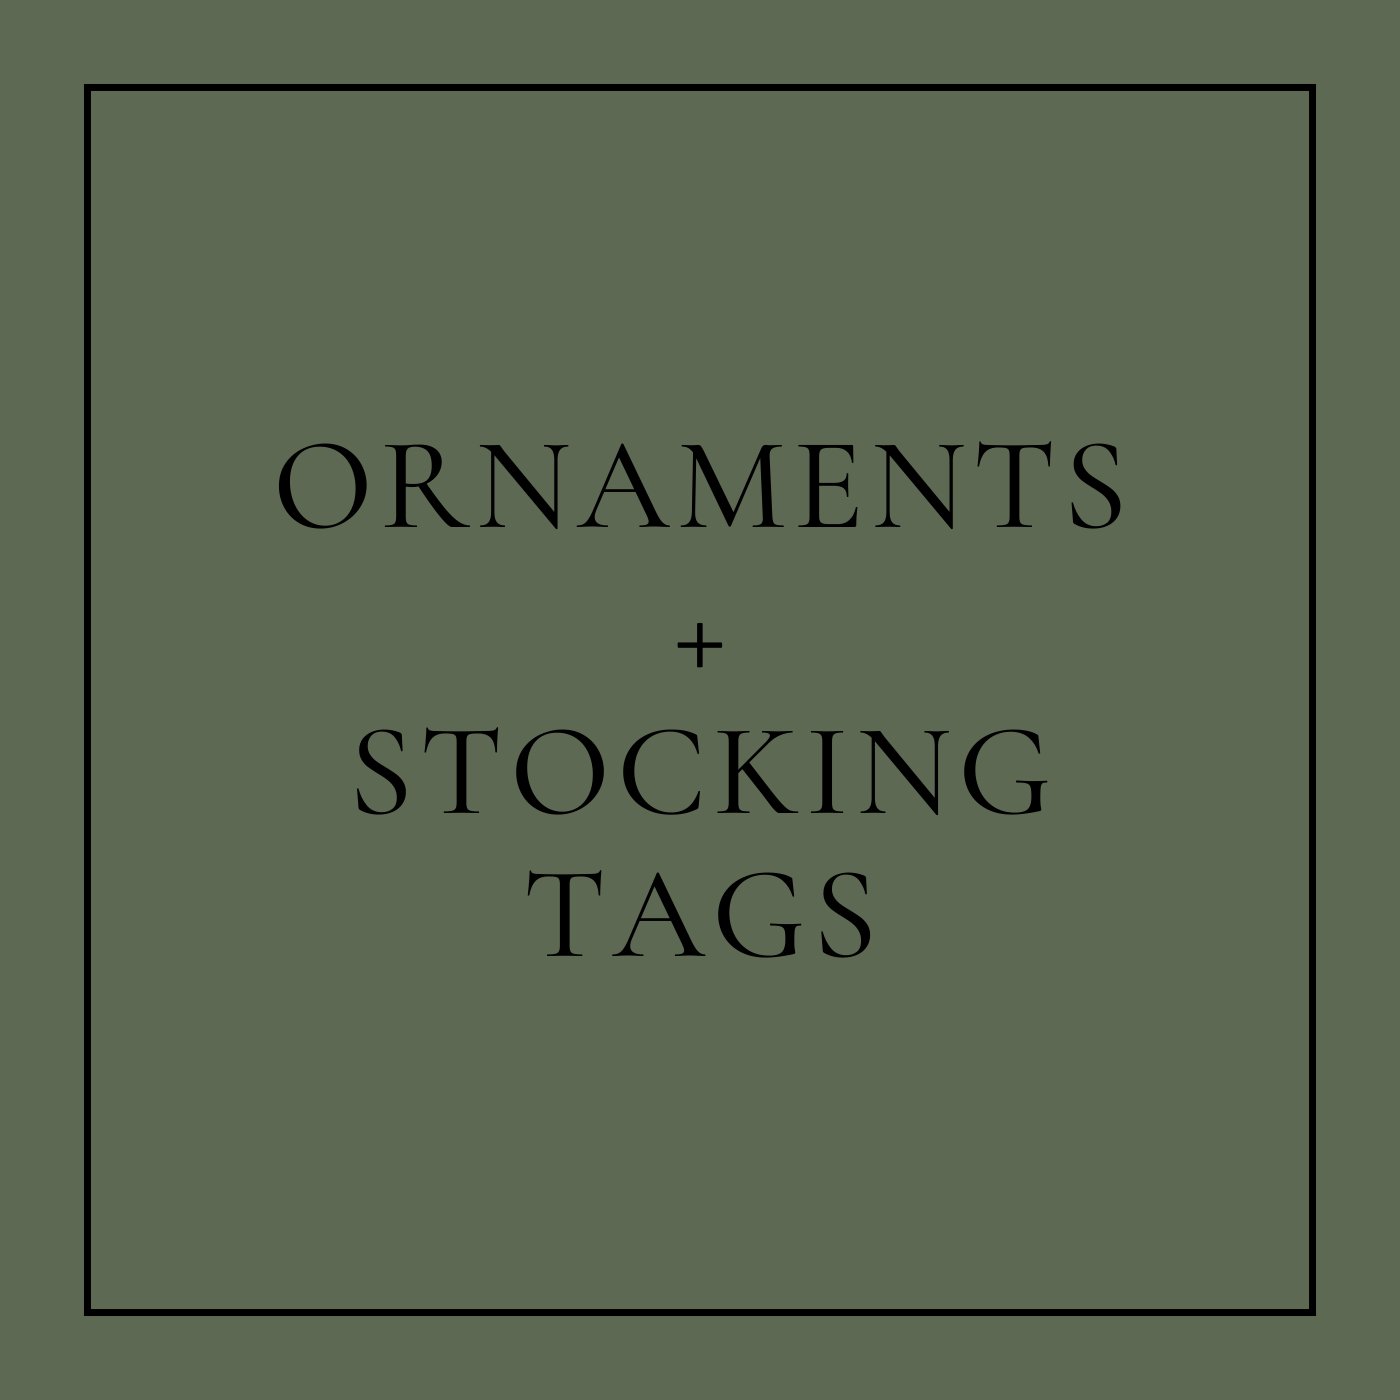 Ornaments + Stocking Tags